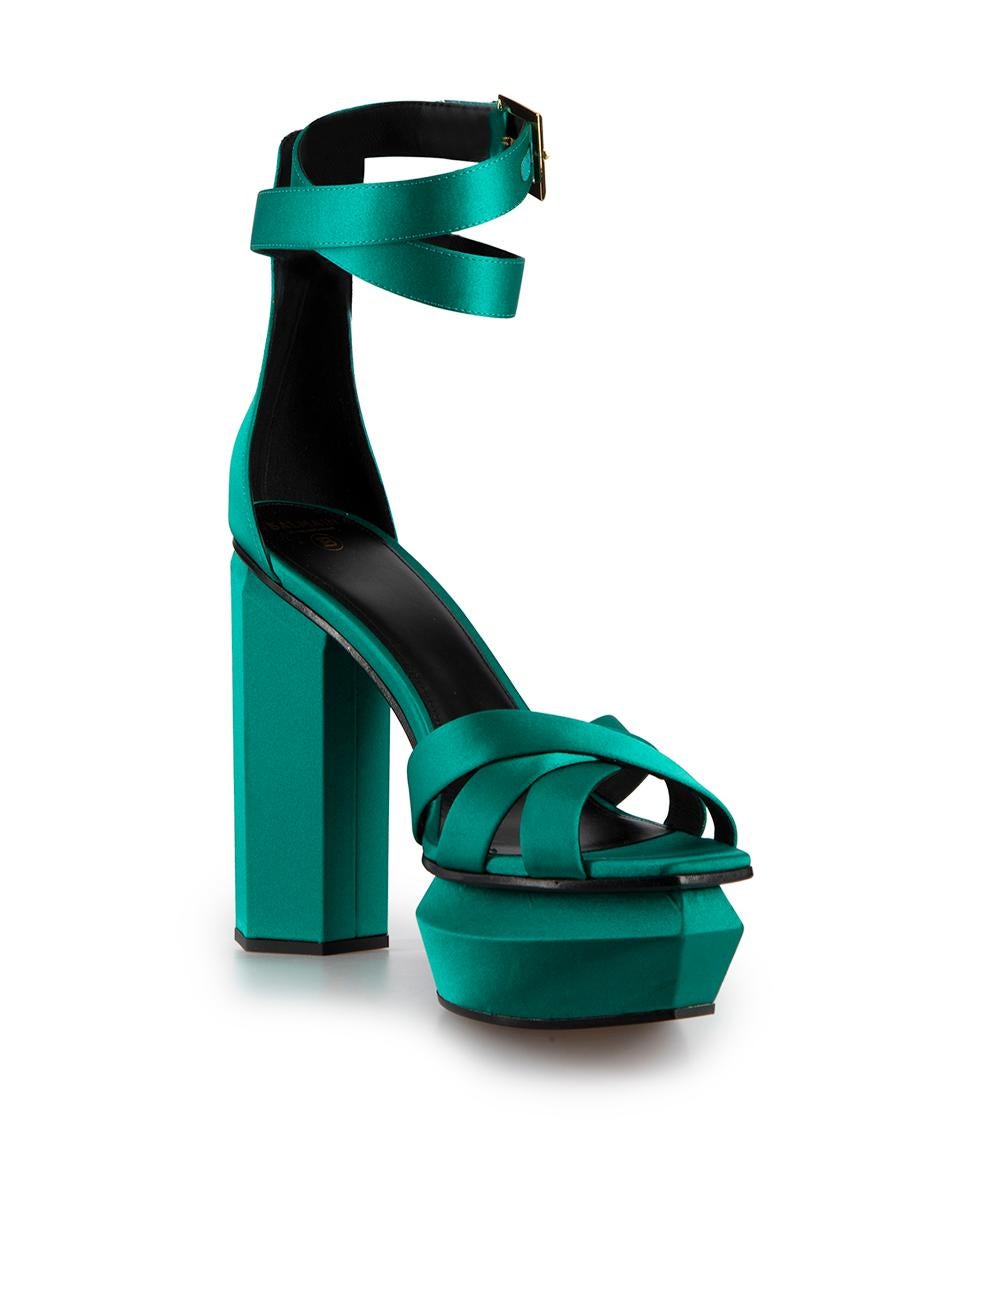 CONDITION is Never worn, with tags. No visible wear to sandals is evident on this new
Balmain designer resale item. This item comes with original box.
  
Details
Green
Satin
Sandals
Open square toe
Platform high heel
Ankle buckled strap closure
 